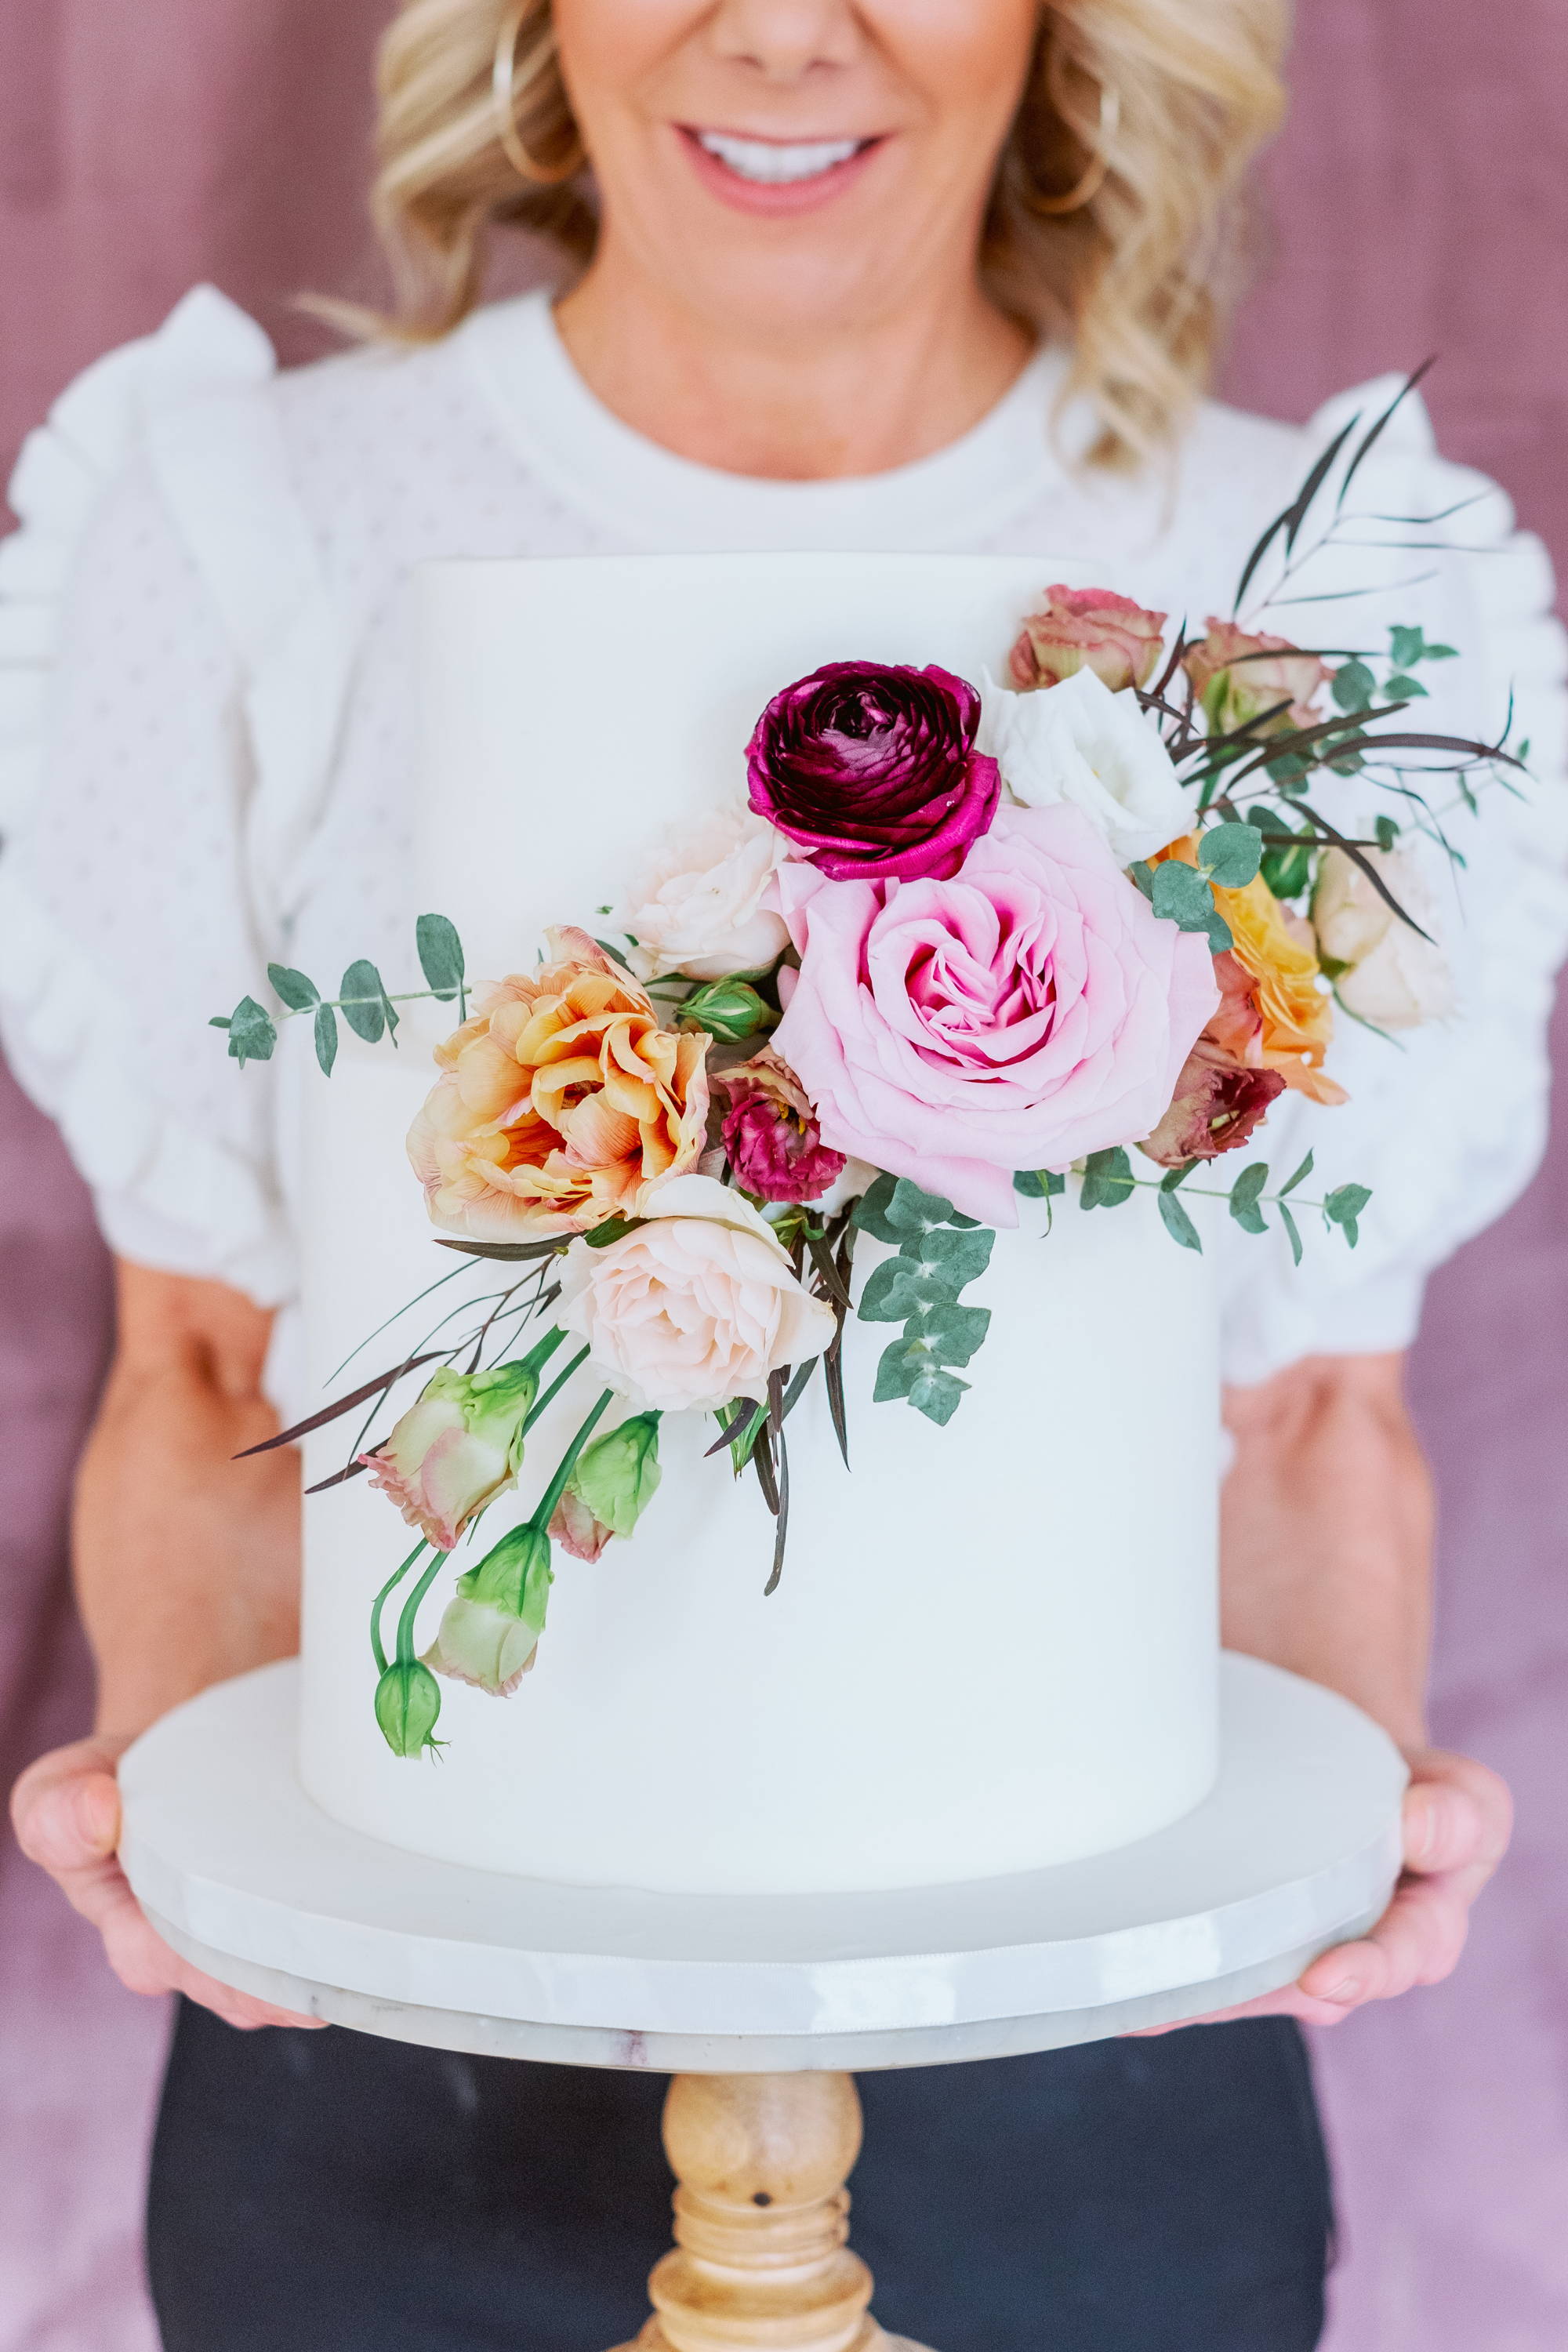 What to Know About Putting Flowers on Your Cakes